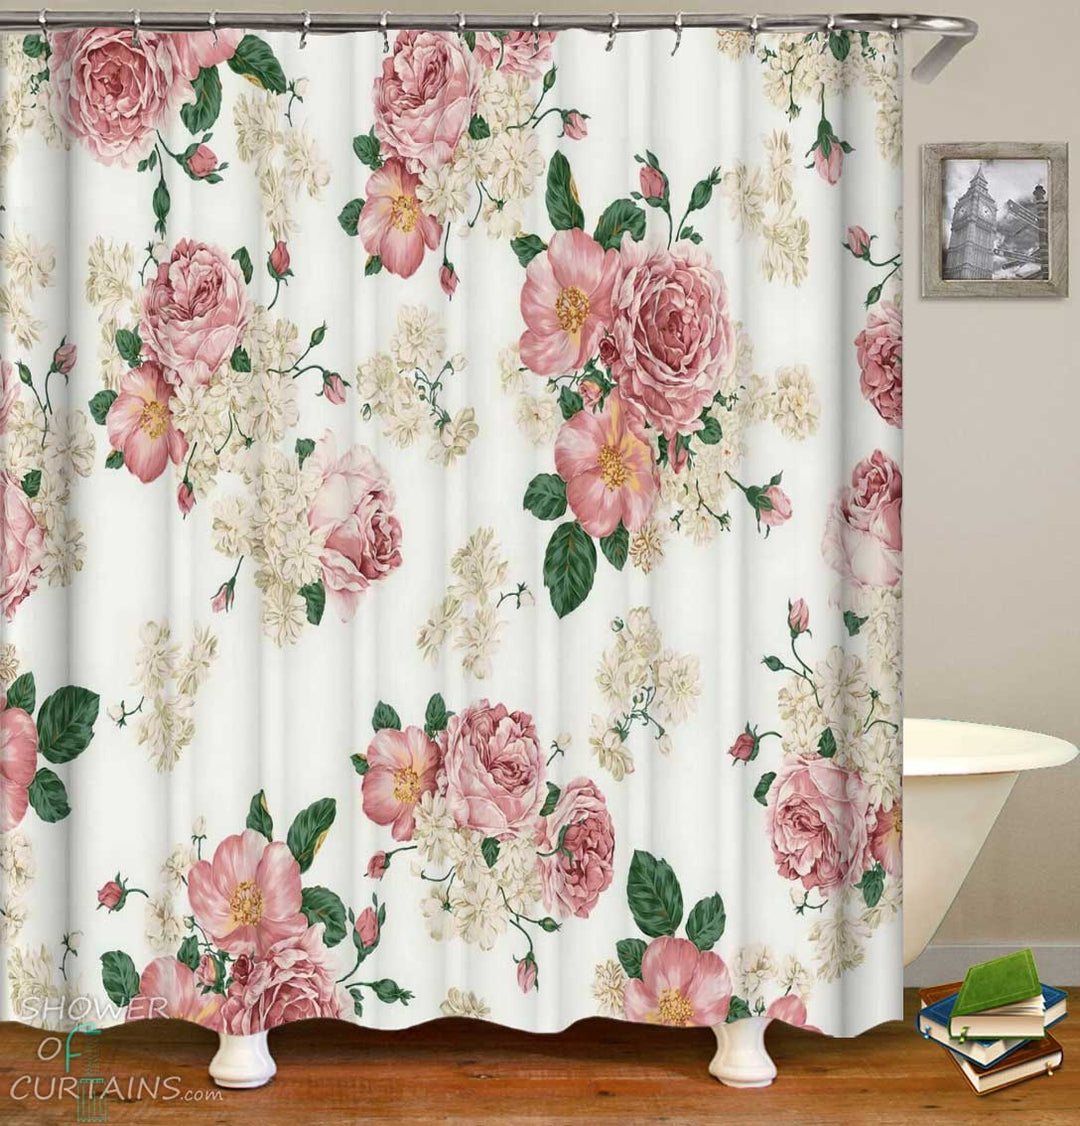 Shower Curtains with Old Fashioned Roses Pattern